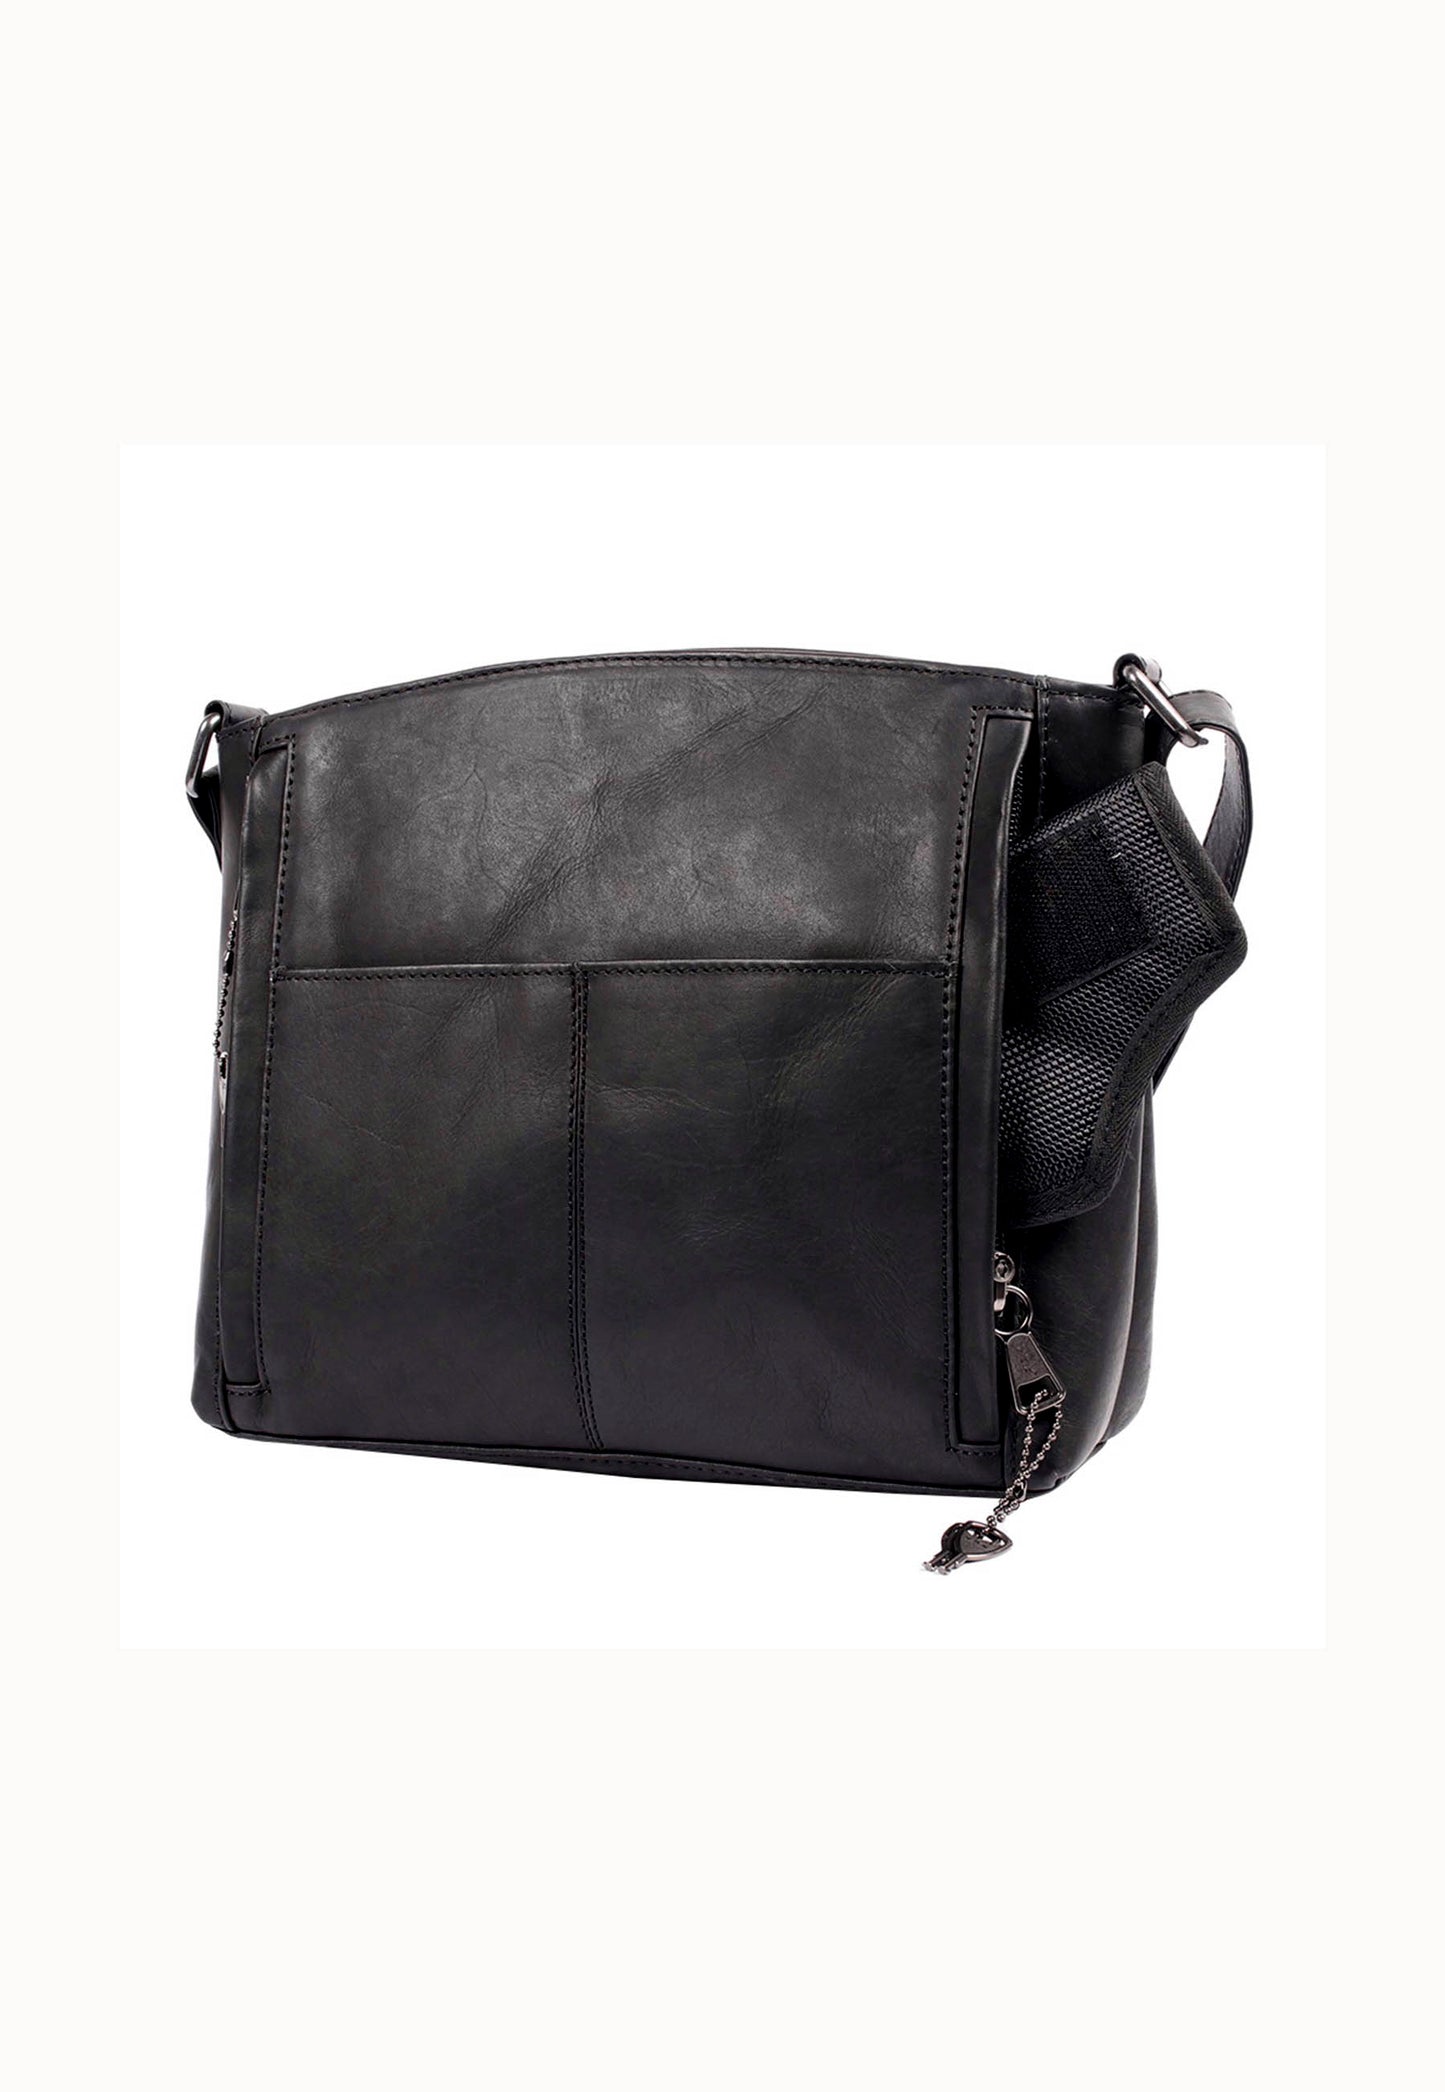 Side view of womens conceal carry bag